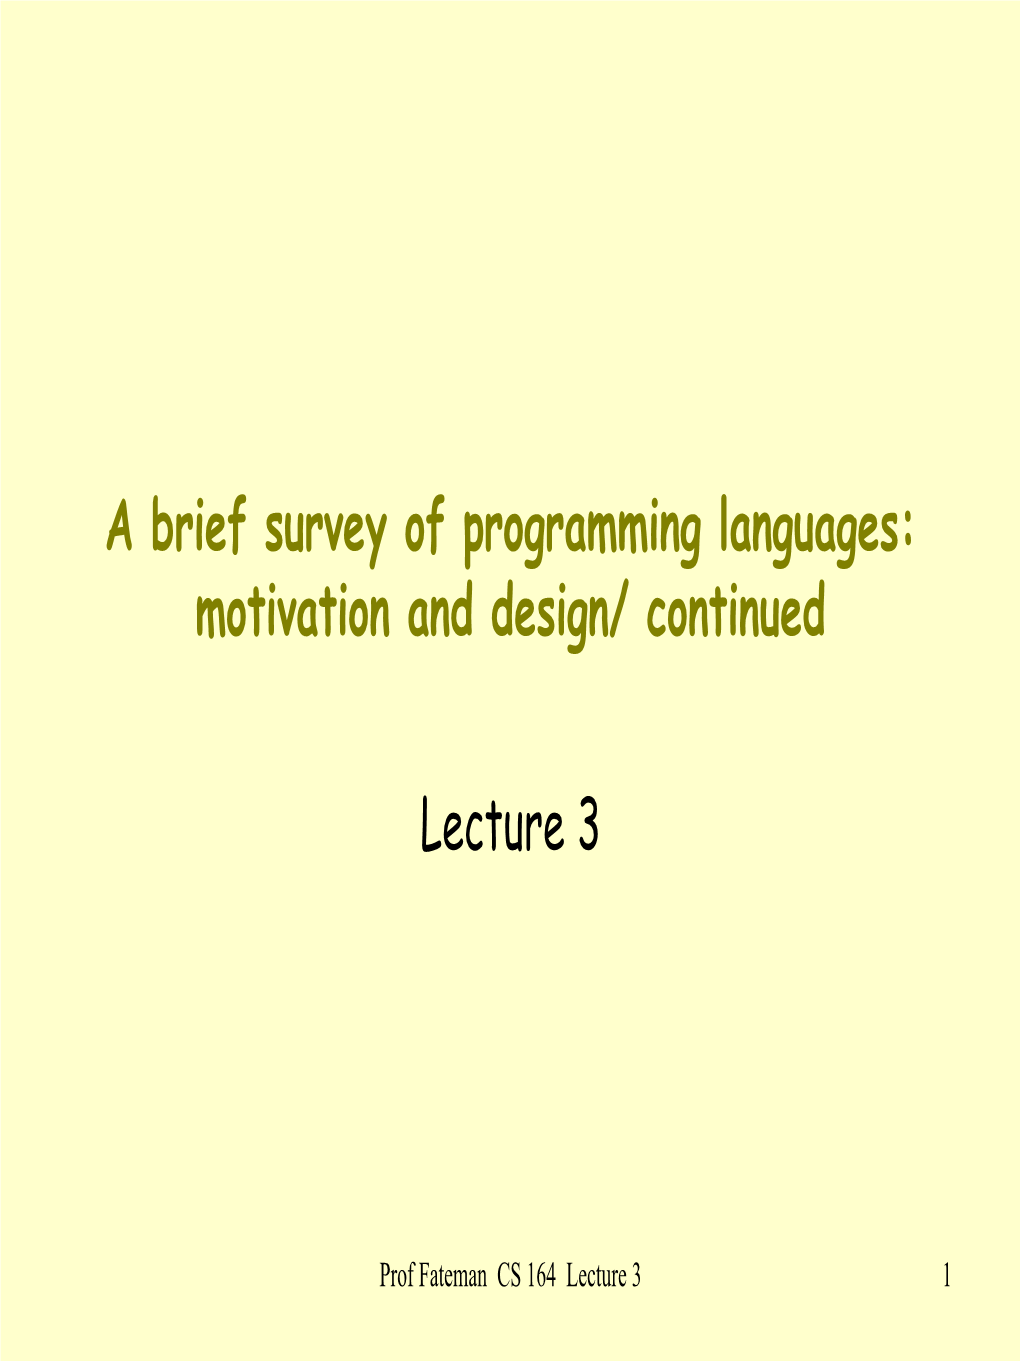 Introduction to Programming Languages and Compilers